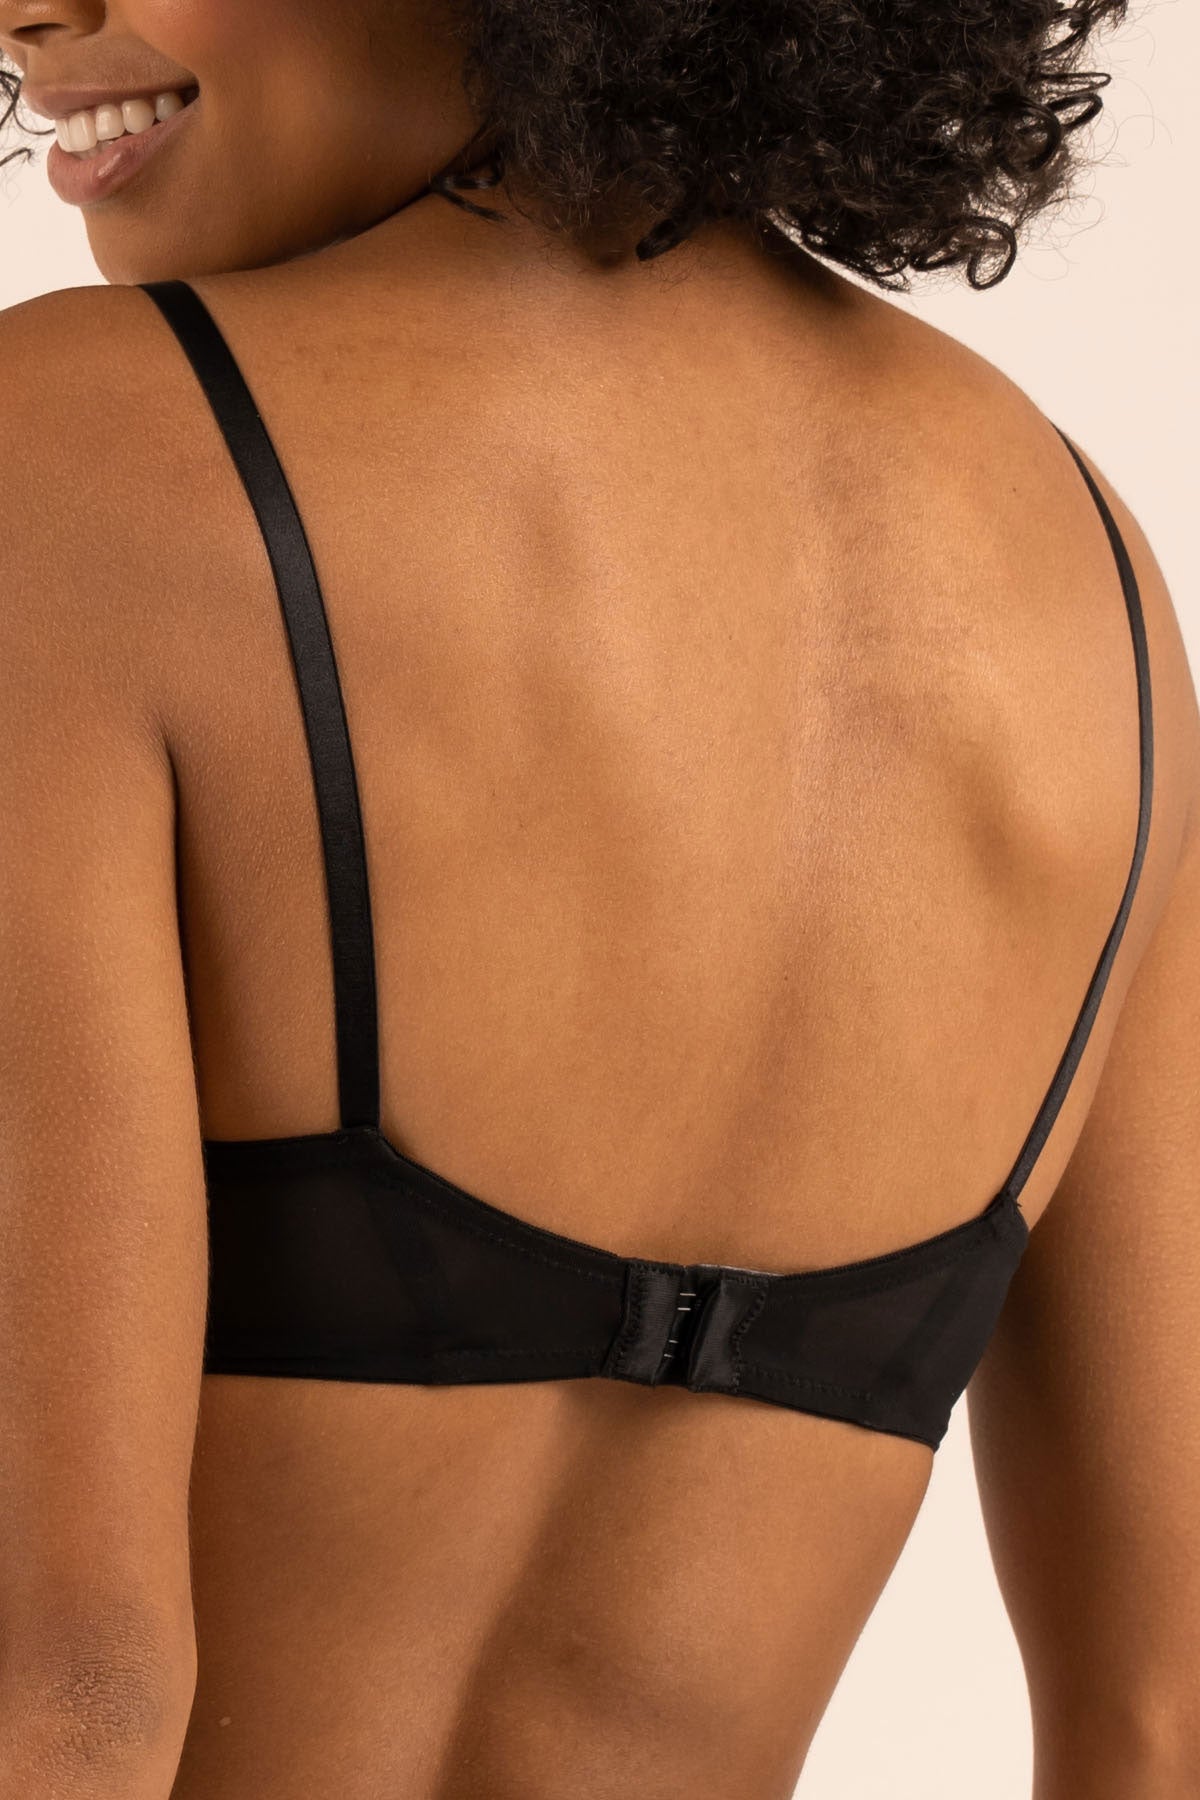 Meet GIAPENTA, the Company Behind Your New Favorite Bra - Daily